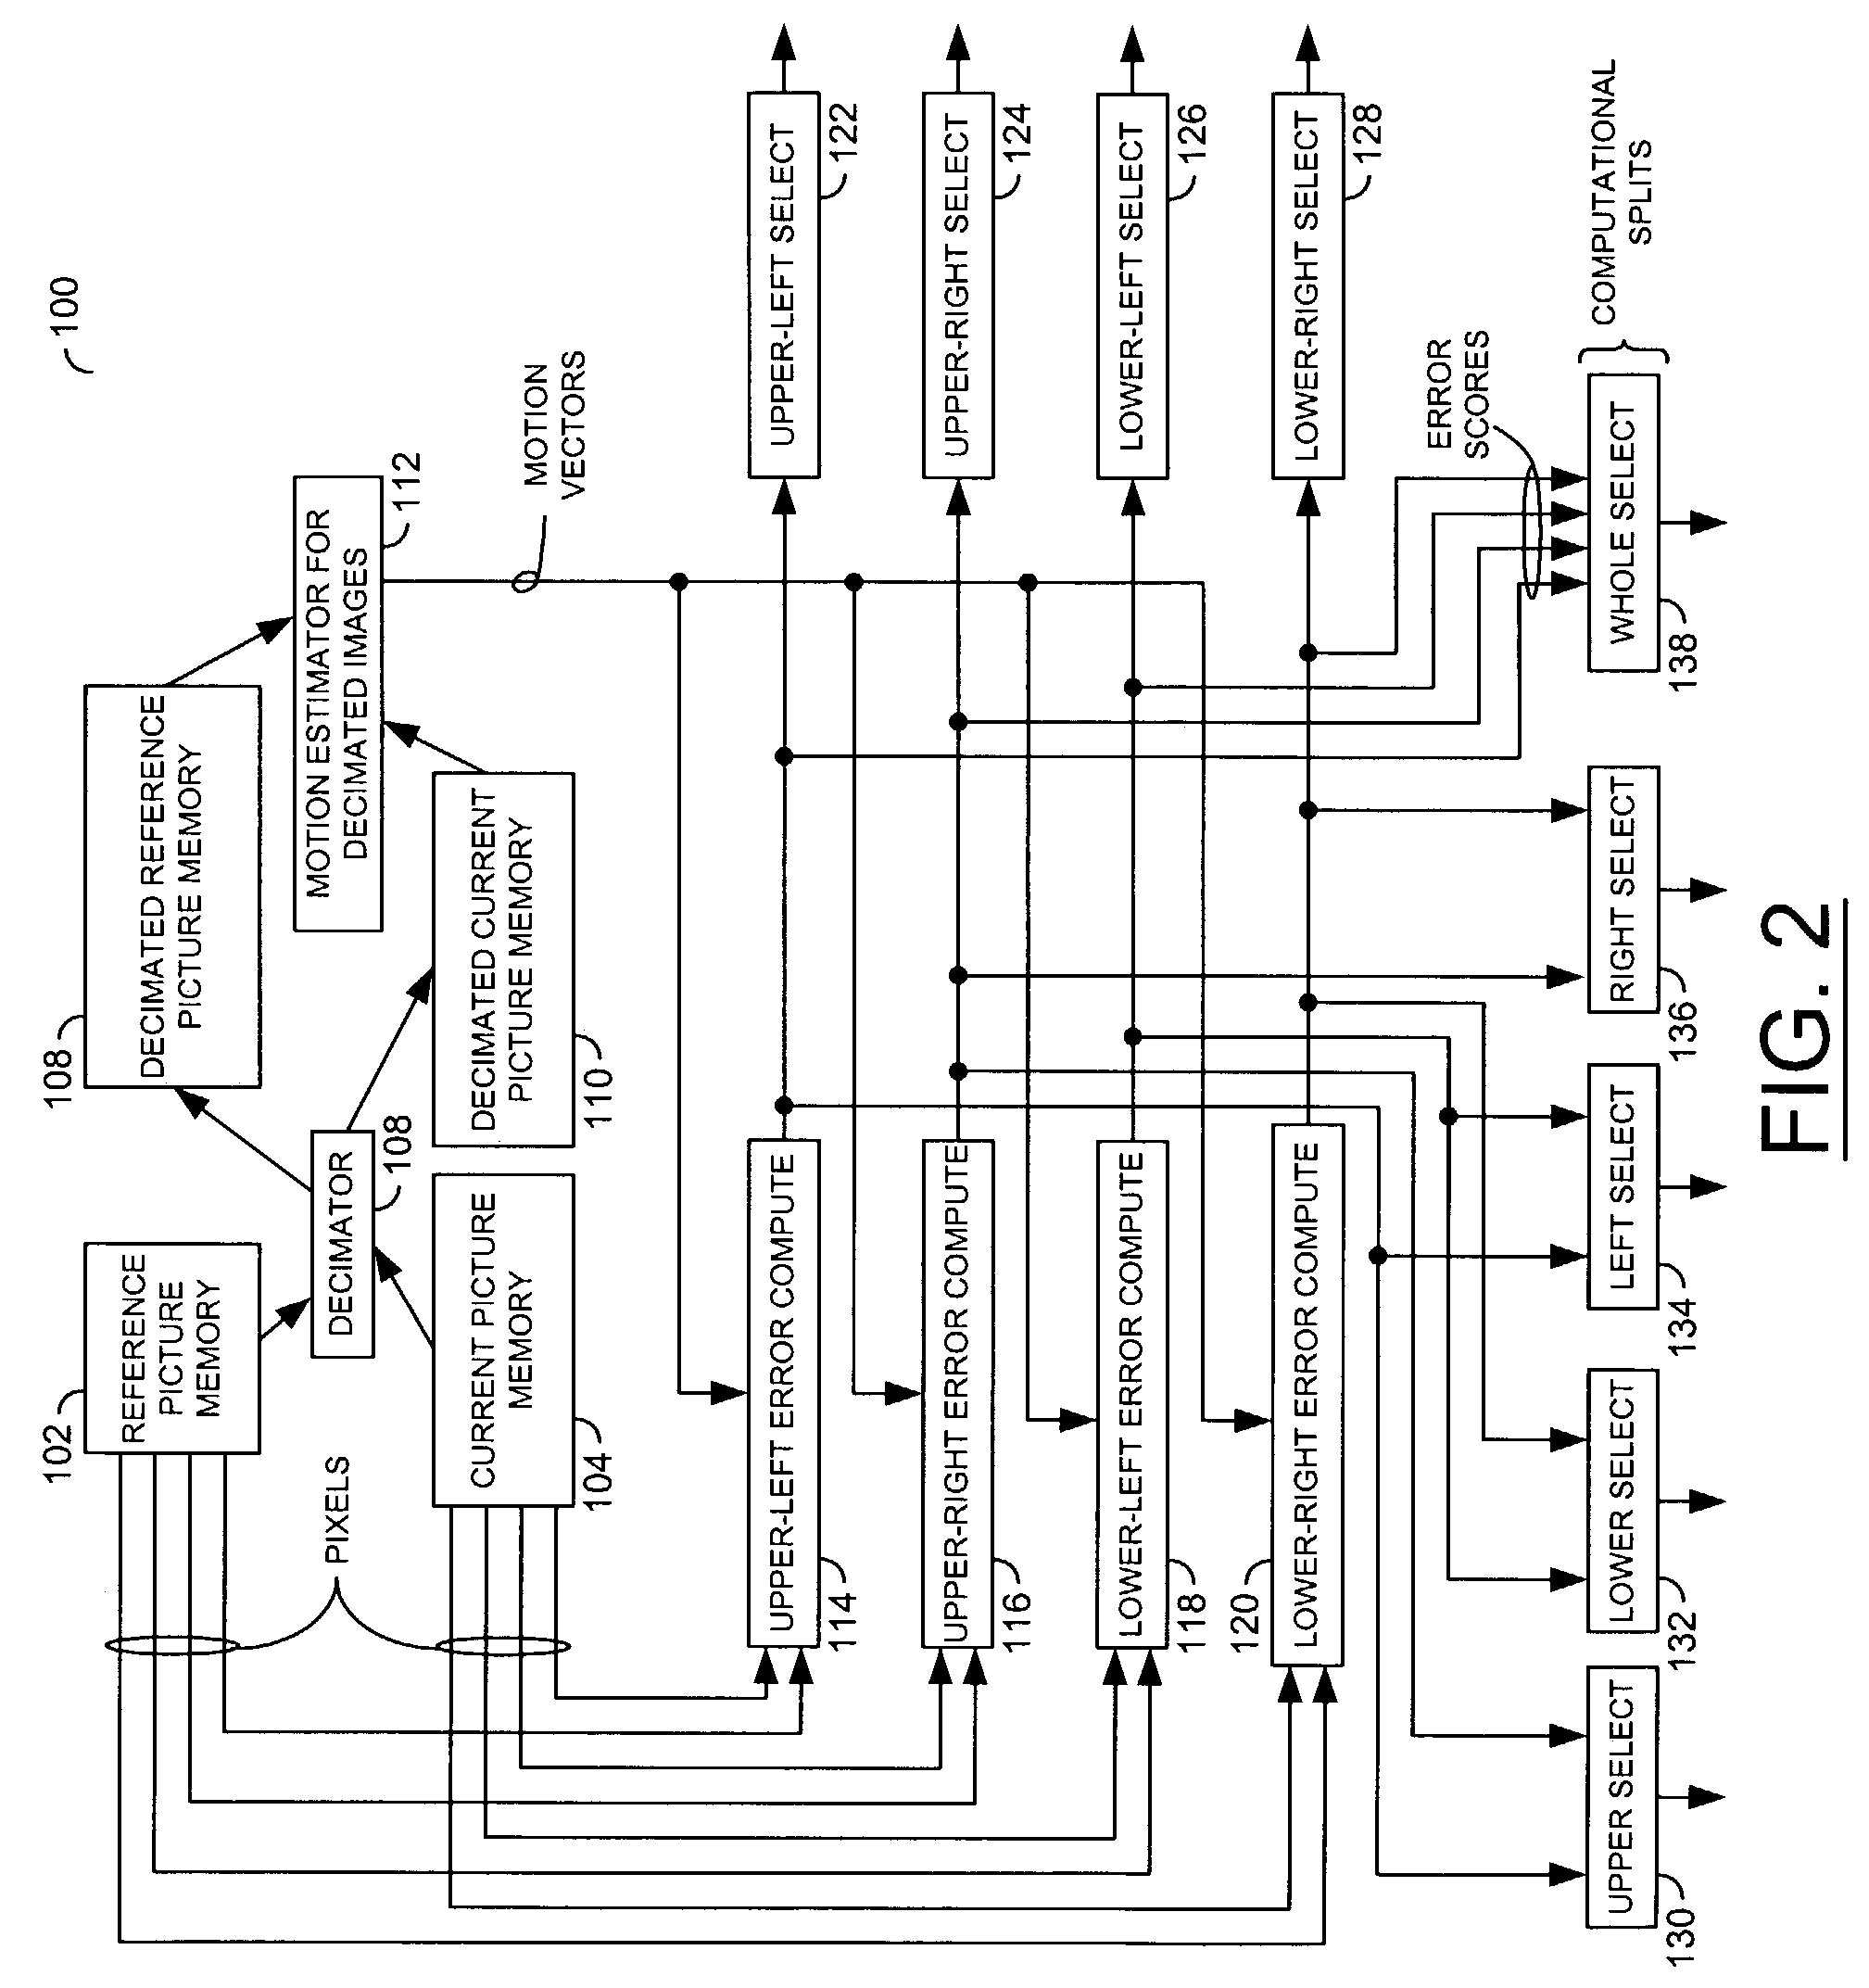 Method and/or apparatus for motion estimation using a hierarchical search followed by a computation split for different block sizes